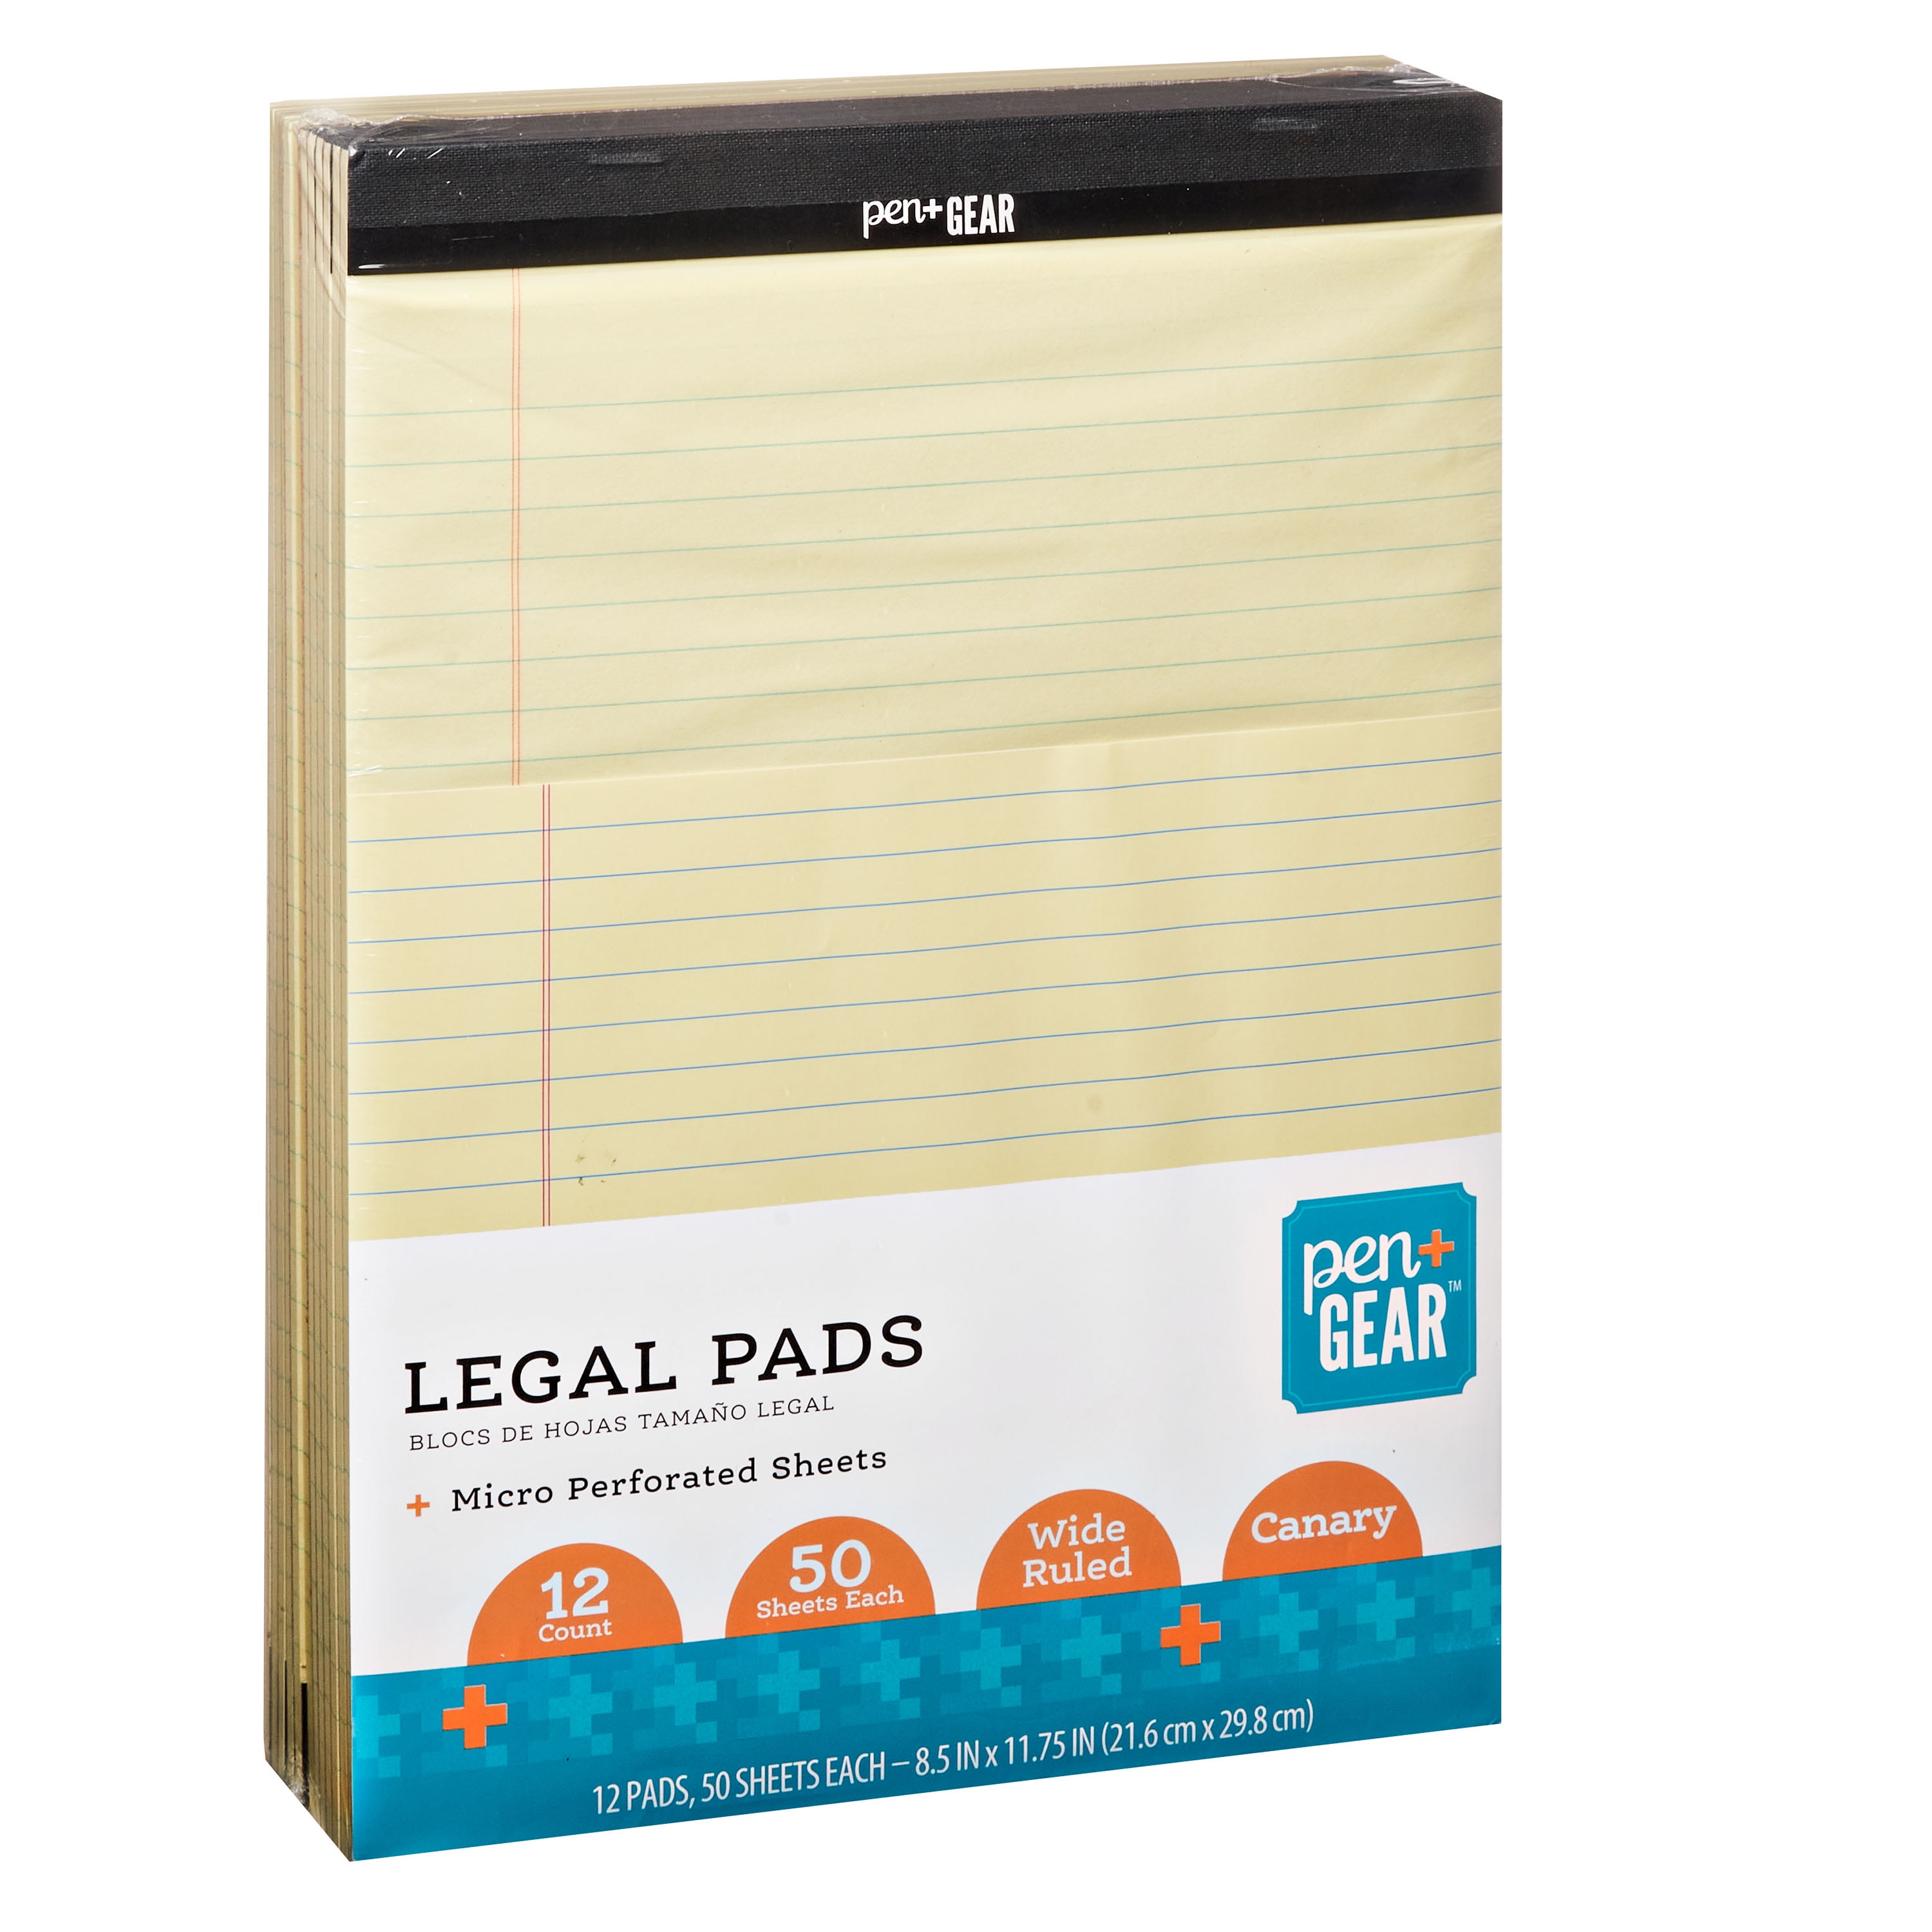 - 100 Sheets per Notepad Professional Micro perforated Writing Pad Notebook Paper for School Office College Mintra Office Legal Pads - DOUBLE PAD 2PK, WHITE, 8.5in x 11in, NARROW RULED 